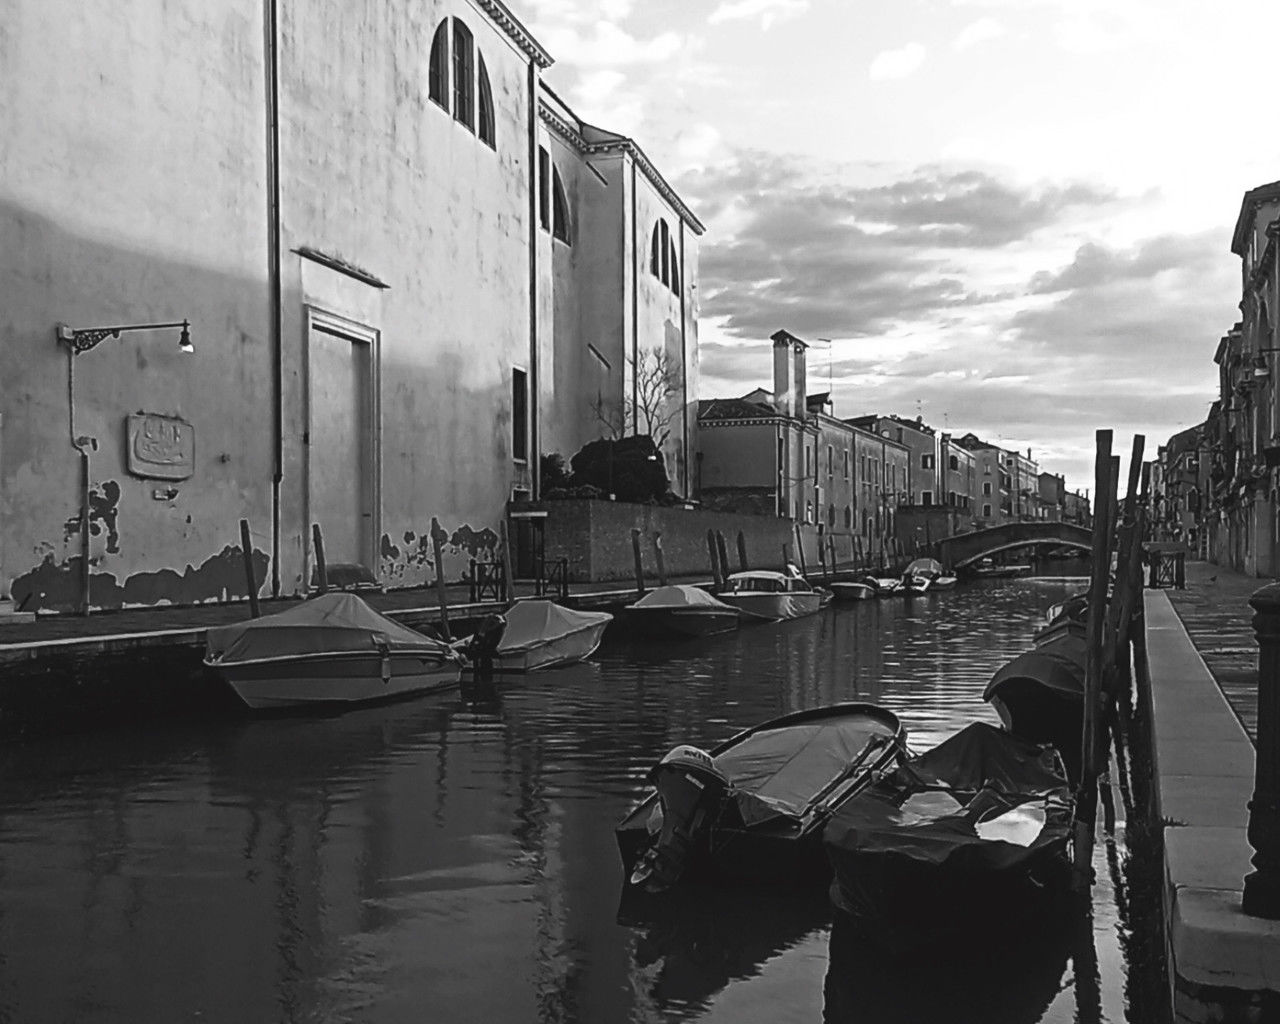 water, nautical vessel, architecture, transportation, mode of transportation, building exterior, sky, built structure, black and white, monochrome, waterway, nature, monochrome photography, cloud, moored, reflection, boat, canal, vehicle, city, ship, day, building, street, travel, gondola, outdoors, travel destinations, harbor, no people, black, watercraft